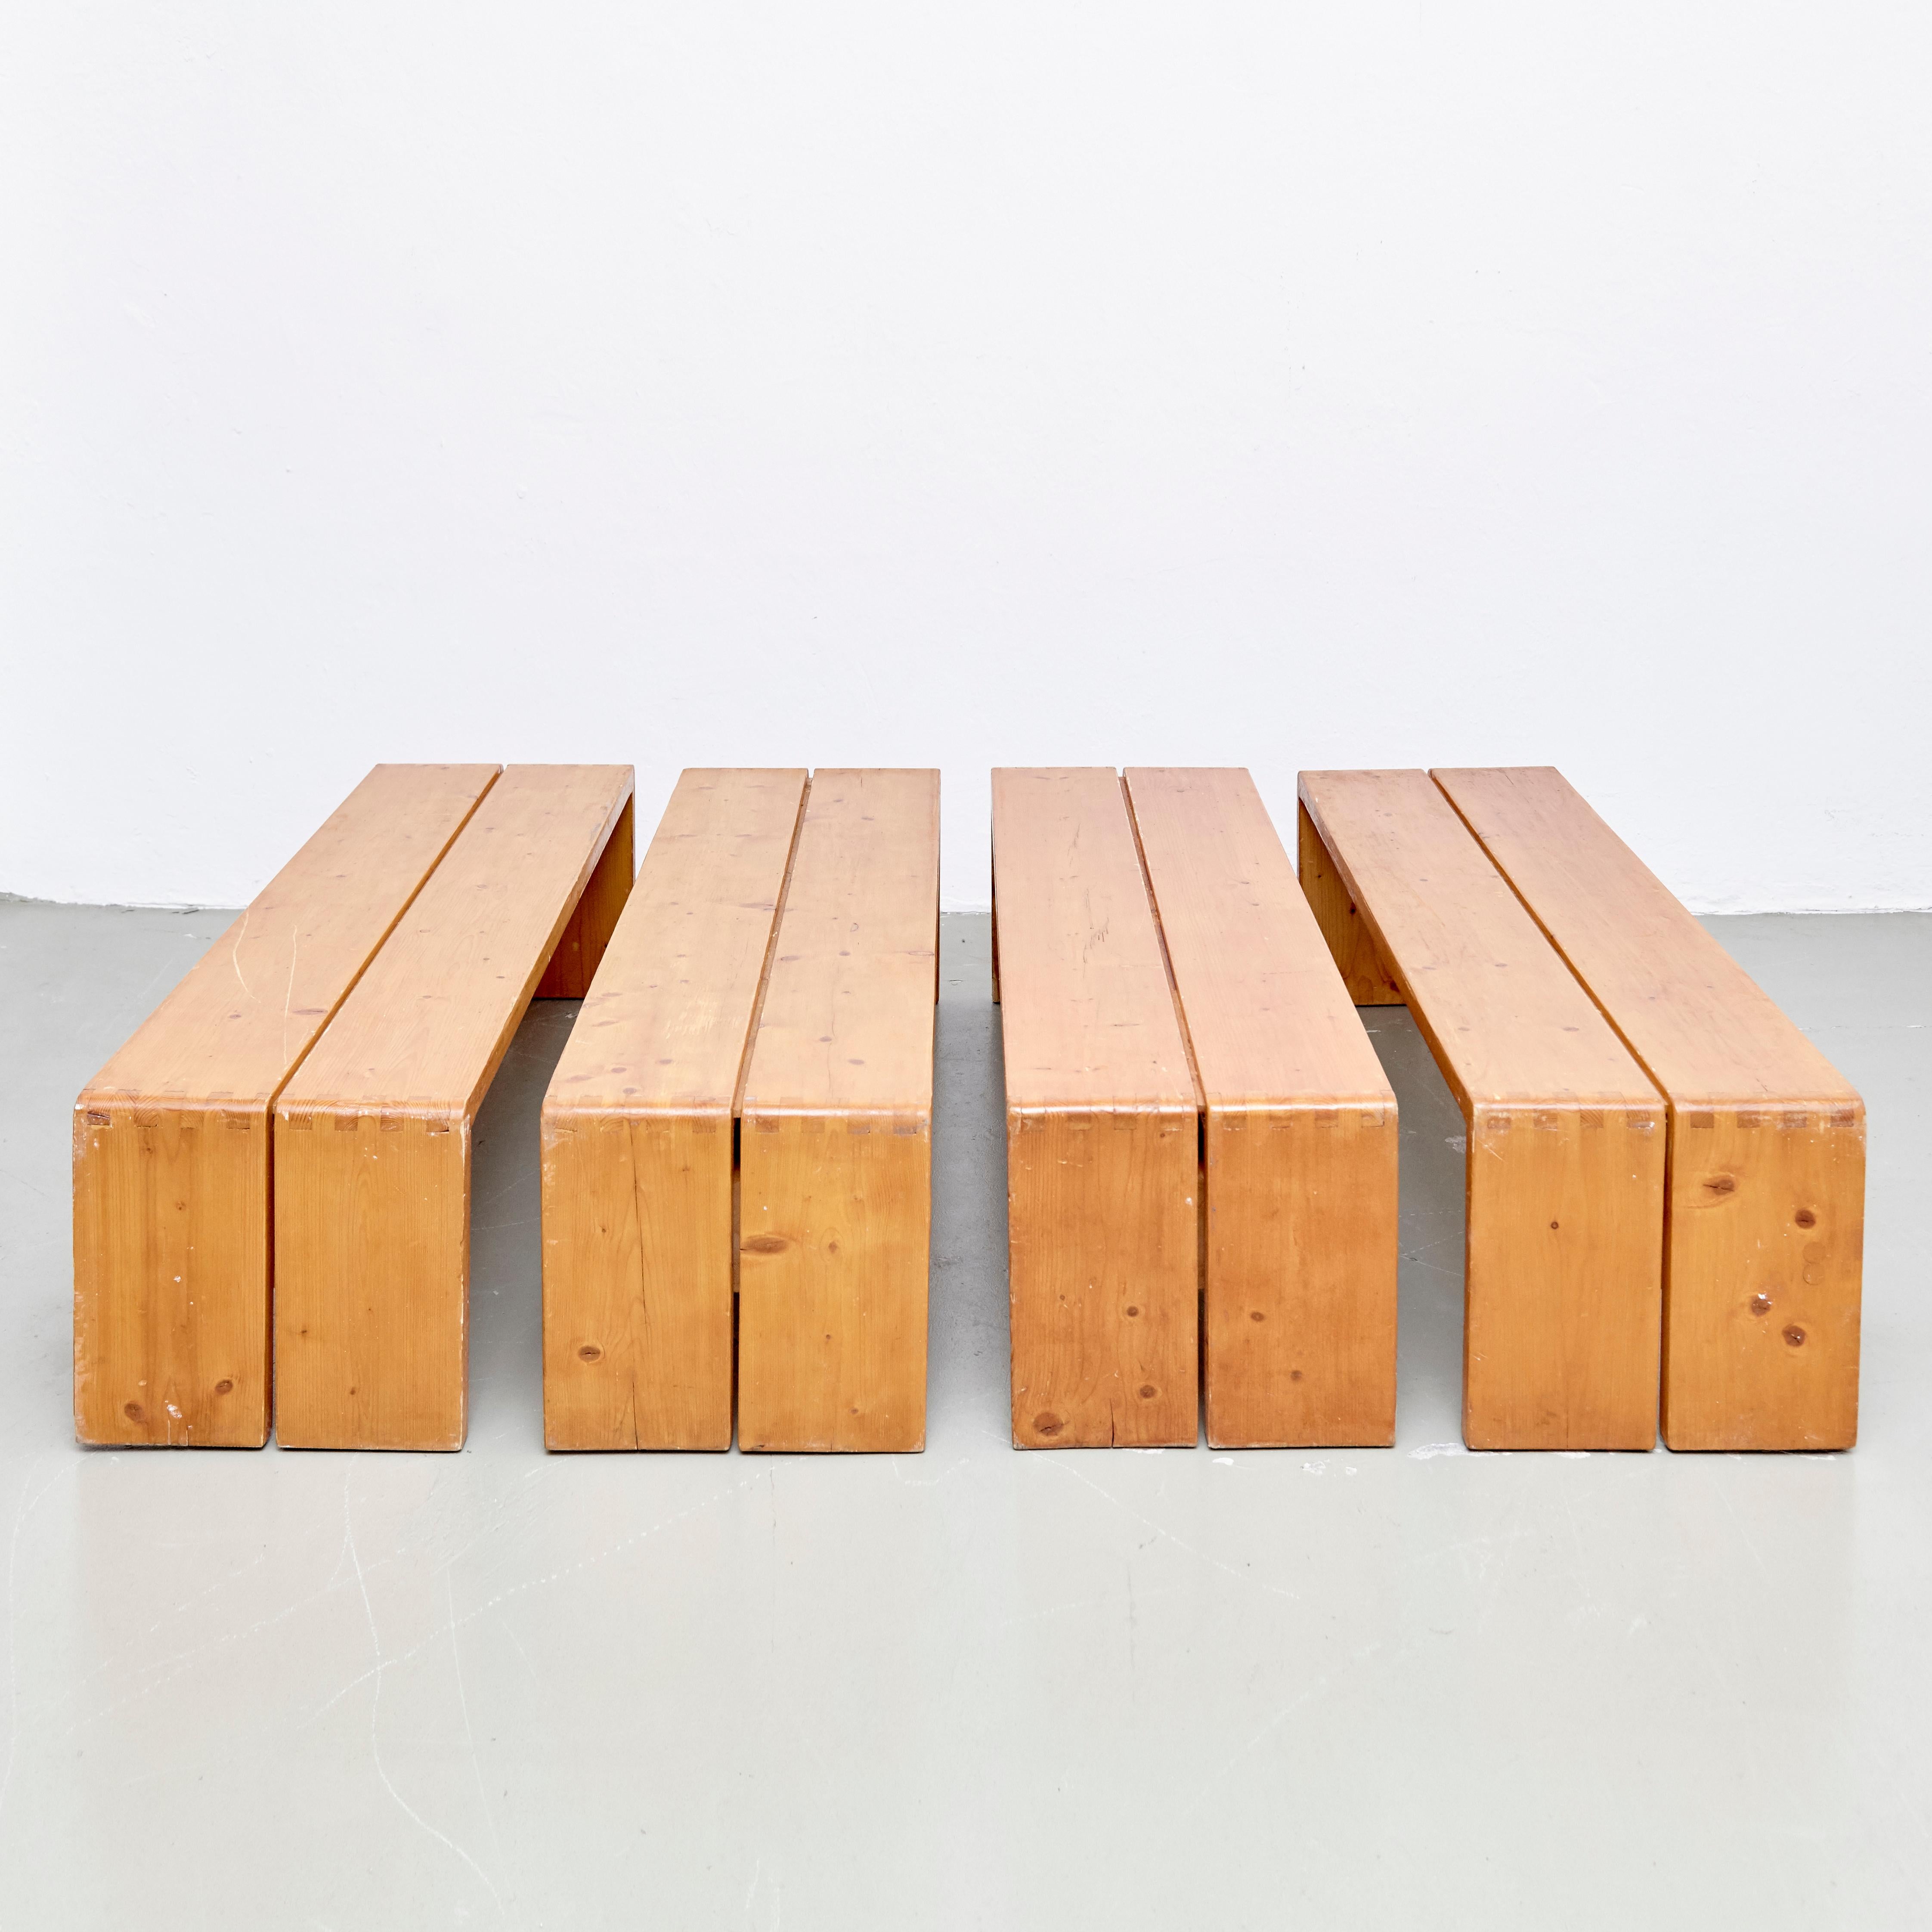 Benches designed by Charlotte Perriand for Les Arcs ski resort circa 1960, manufactured in France.
Pinewood.

In original condition, with wear consistent with age and use, preserving a beautiful patina.

Charlotte Perriand (1903-1999) She was